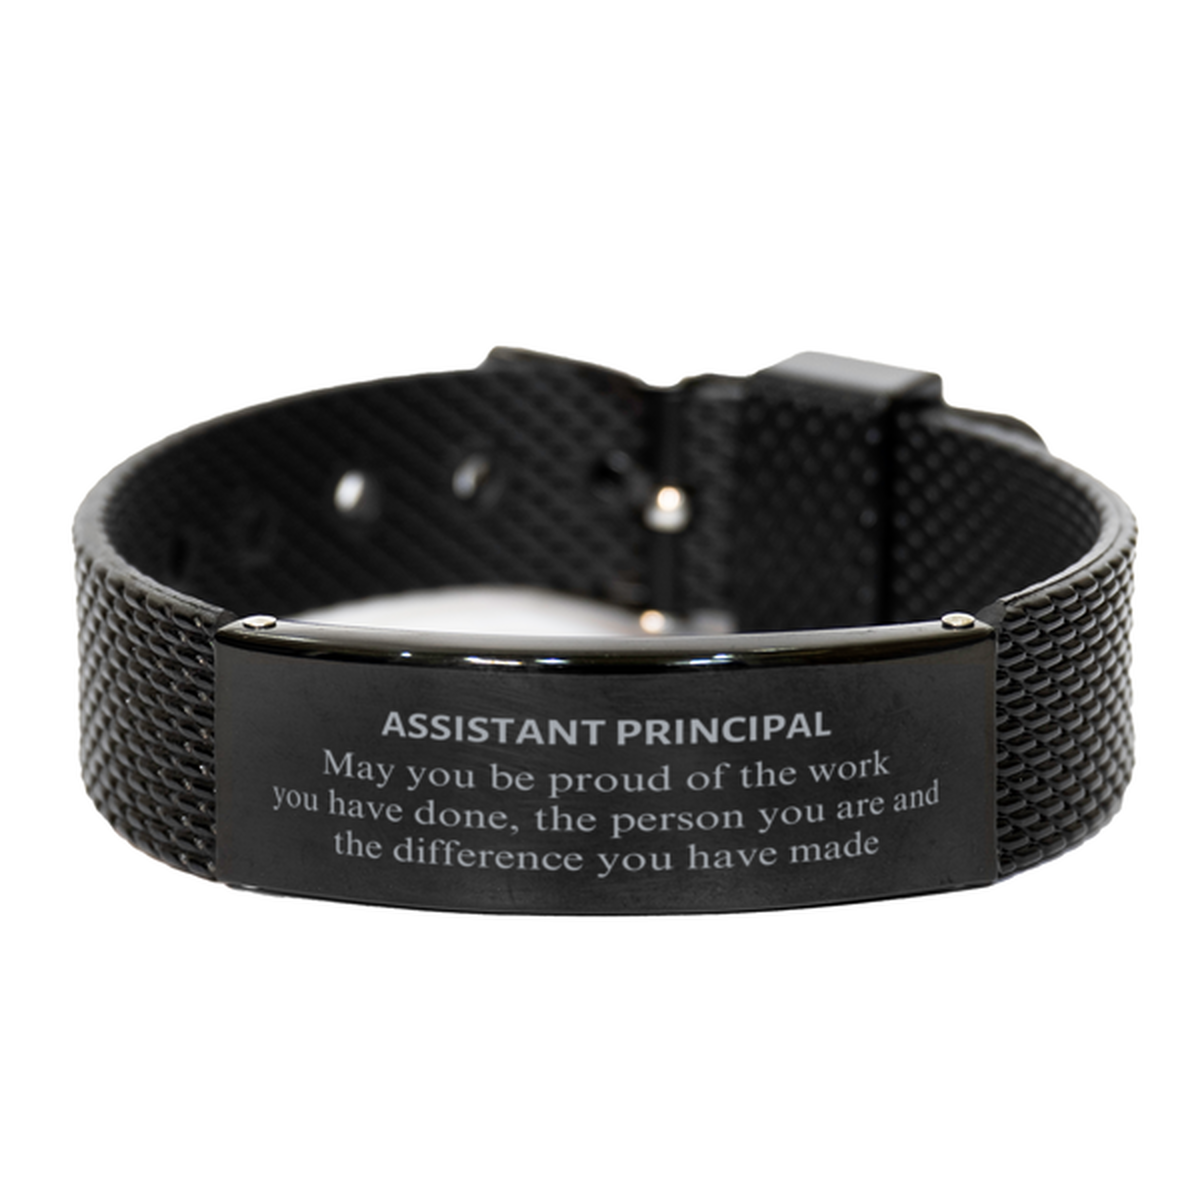 Assistant Principal May you be proud of the work you have done, Retirement Assistant Principal Black Shark Mesh Bracelet for Colleague Appreciation Gifts Amazing for Assistant Principal